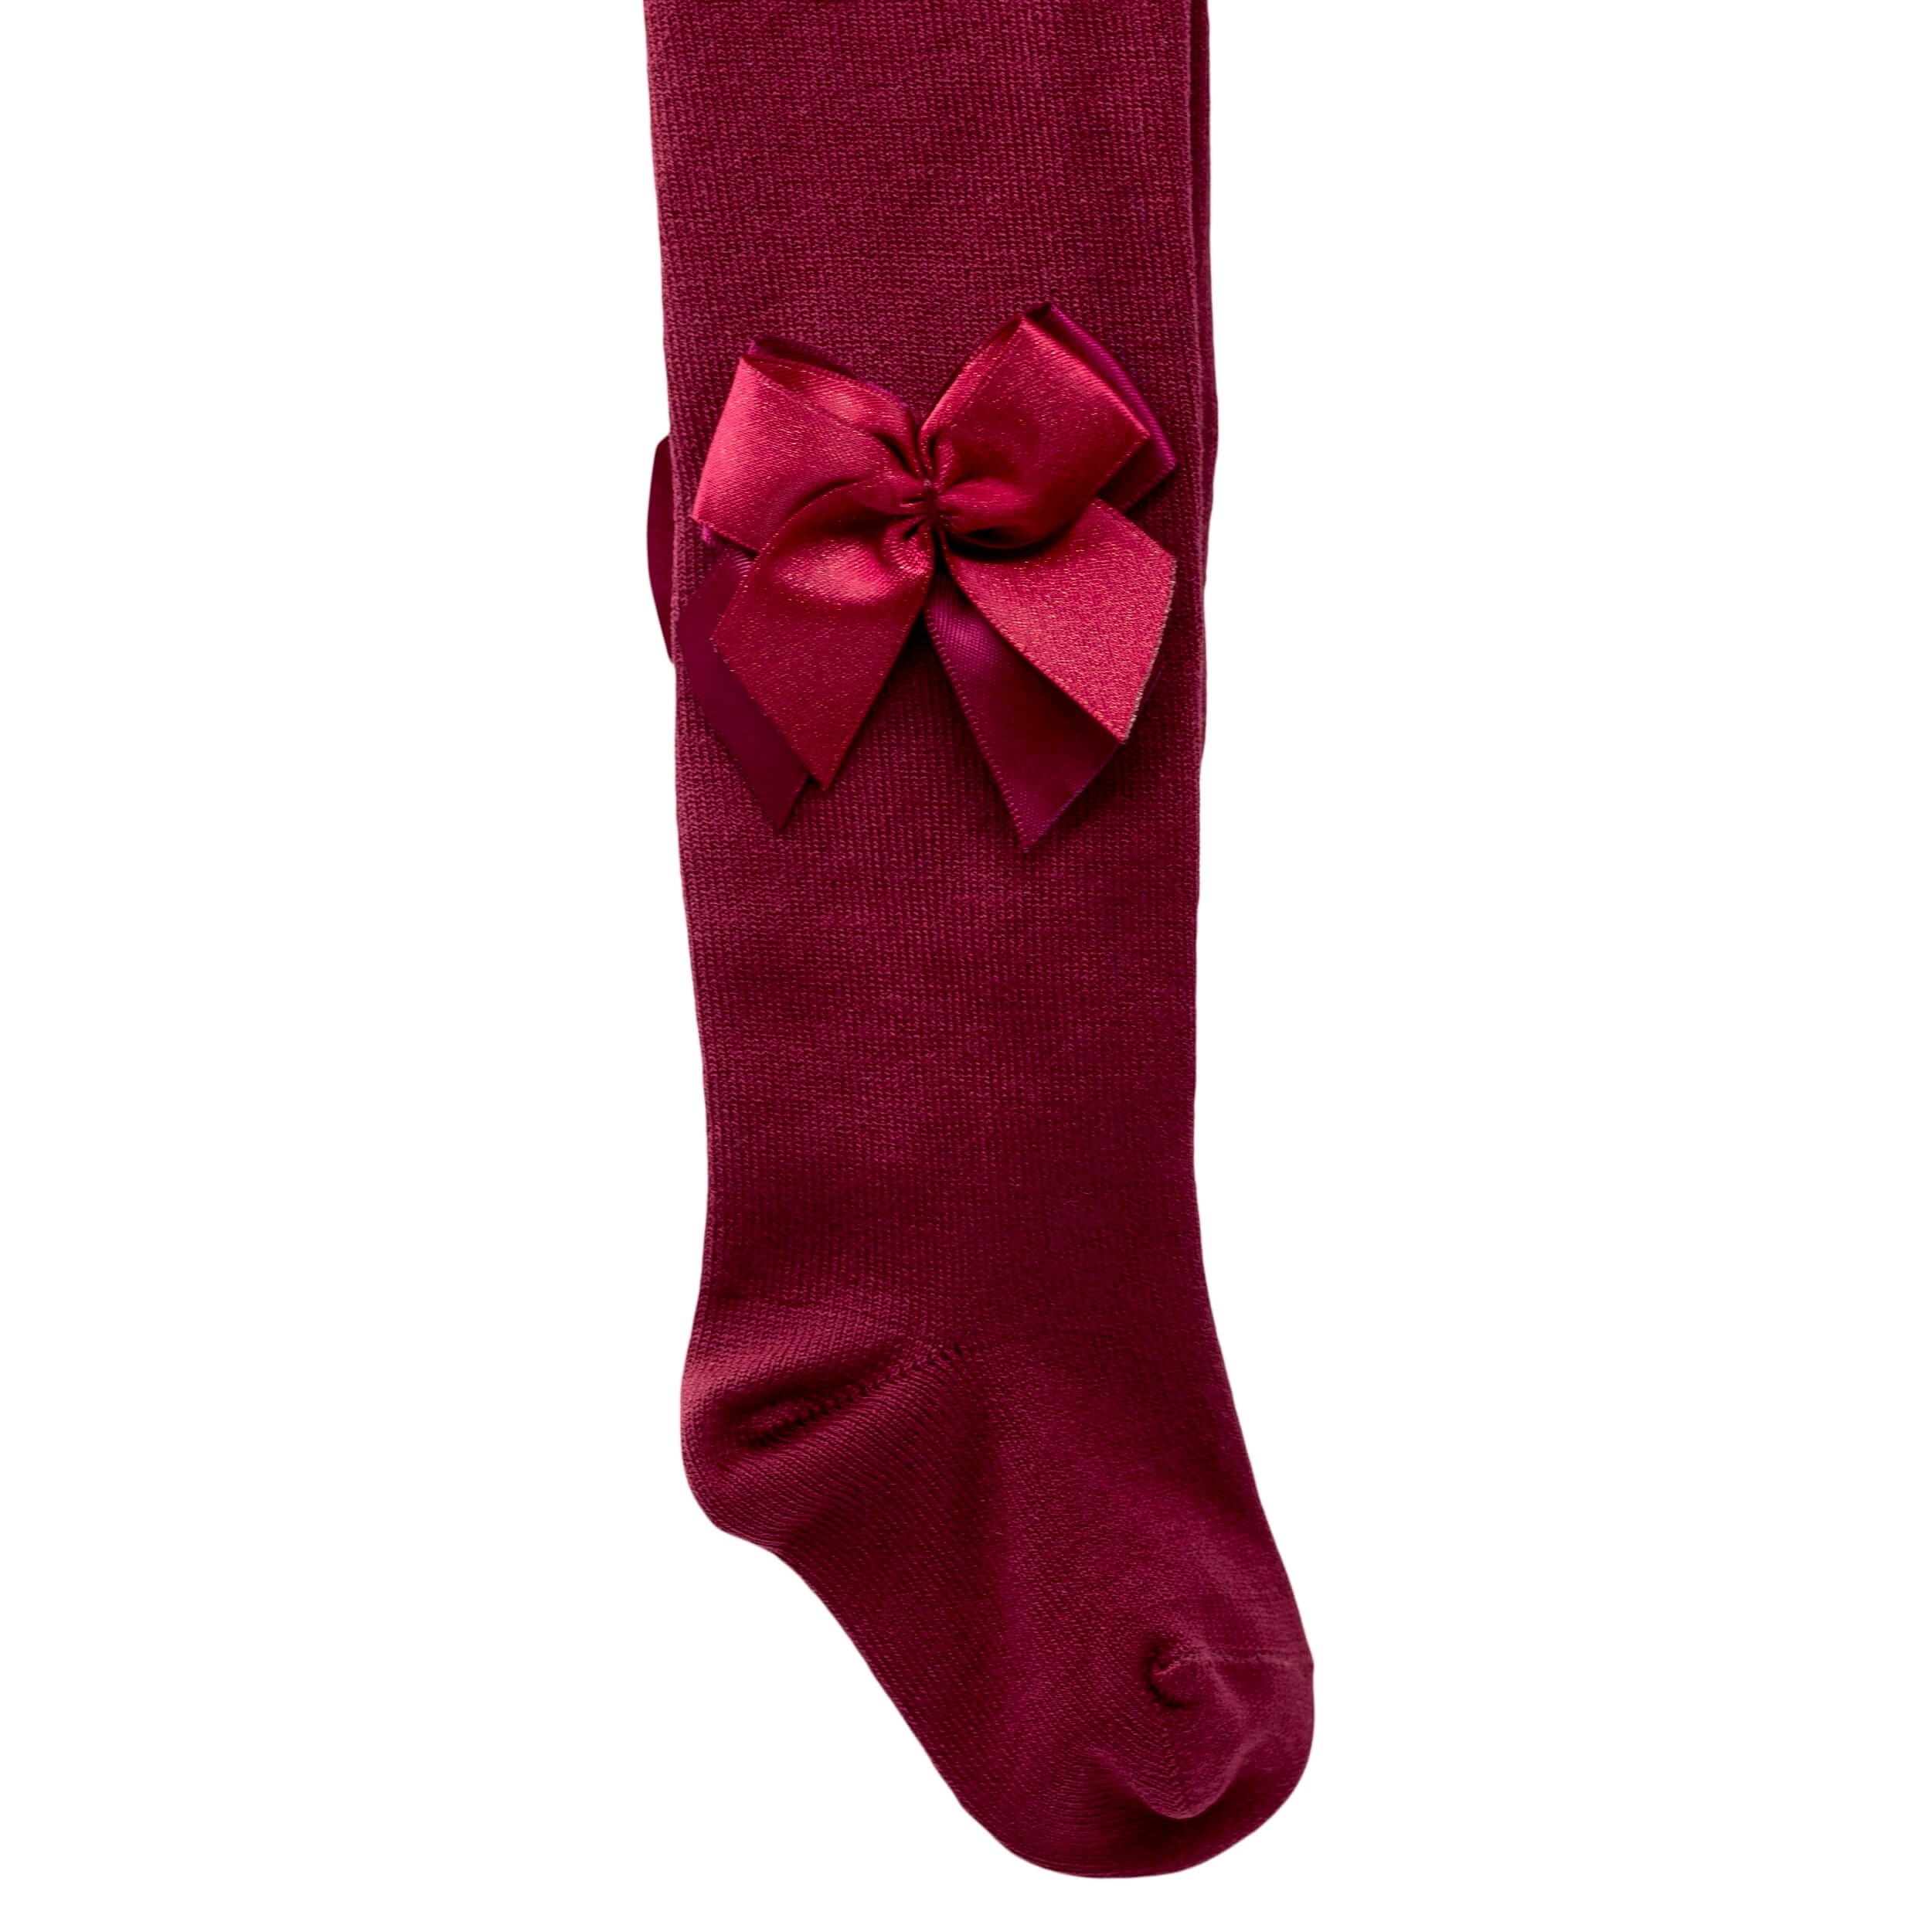 spanish baby tights with double bow in burgundy